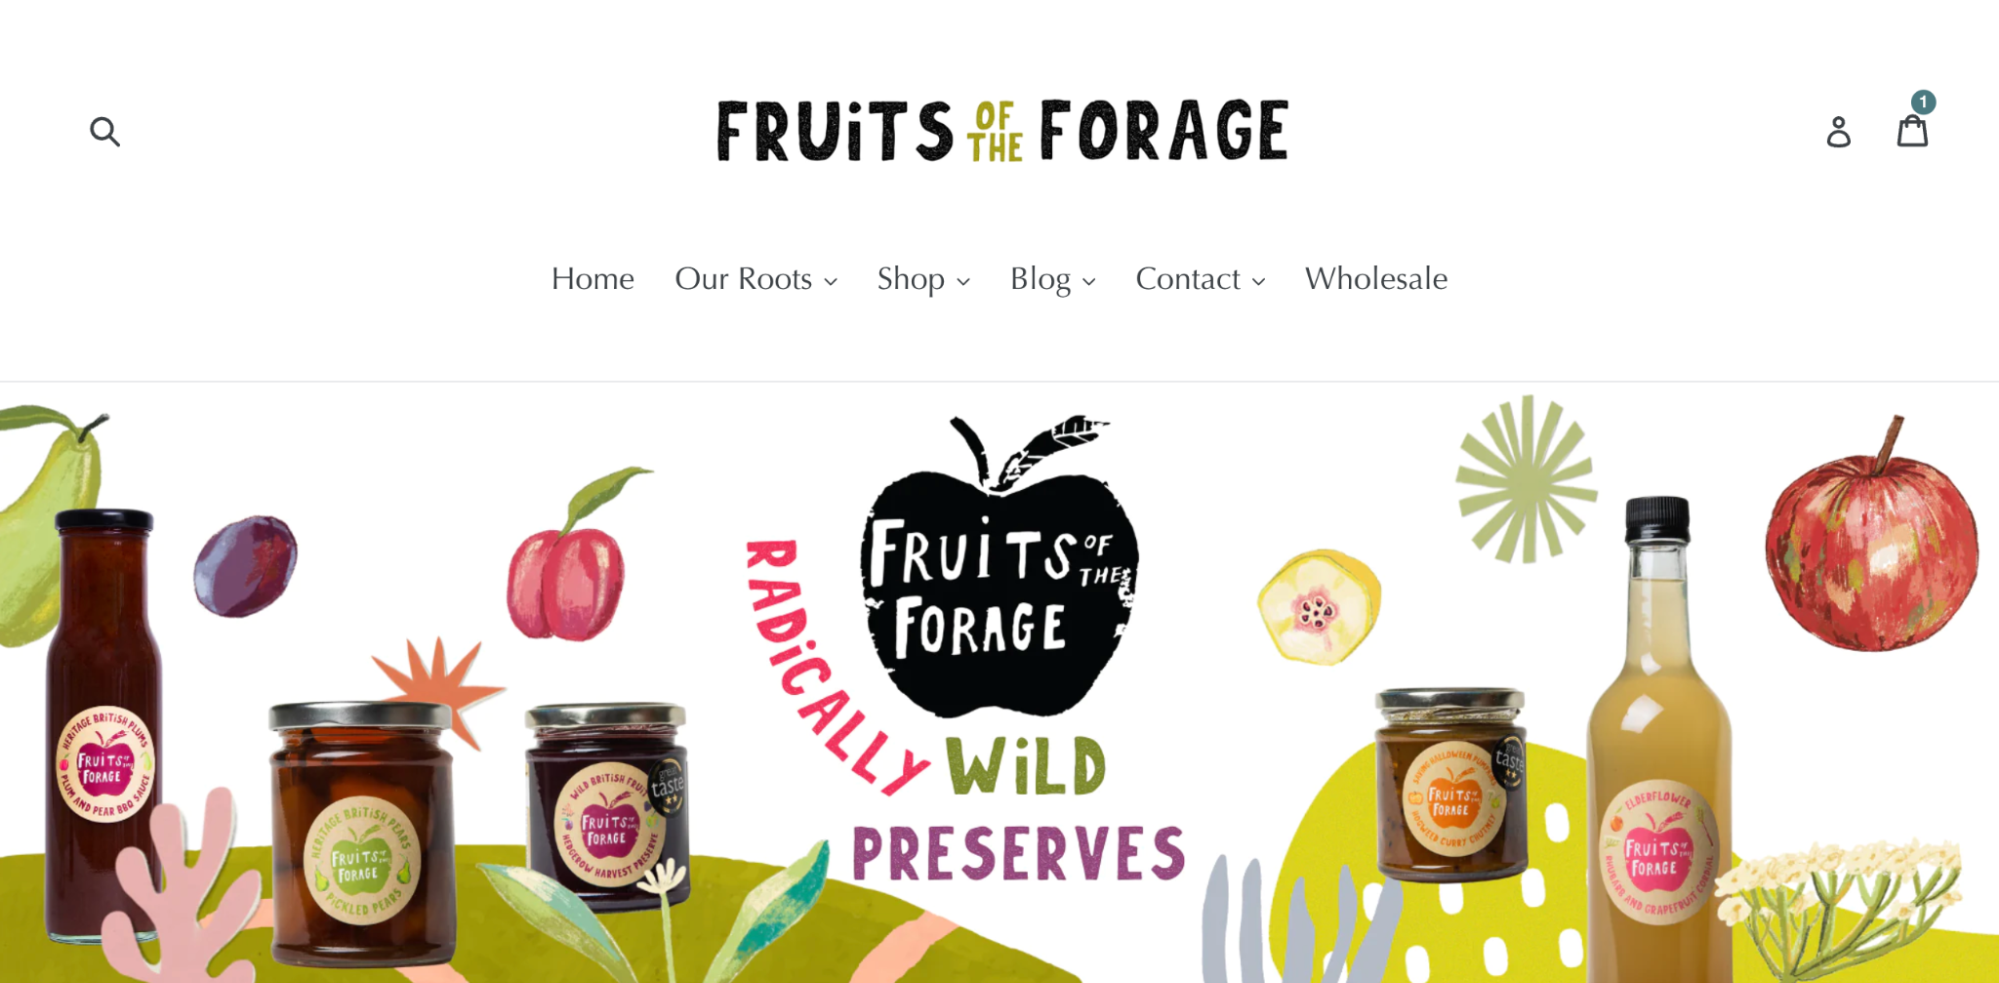 Fruits of the Forage homepage with product images of fruit, jarred preserves, and their logo